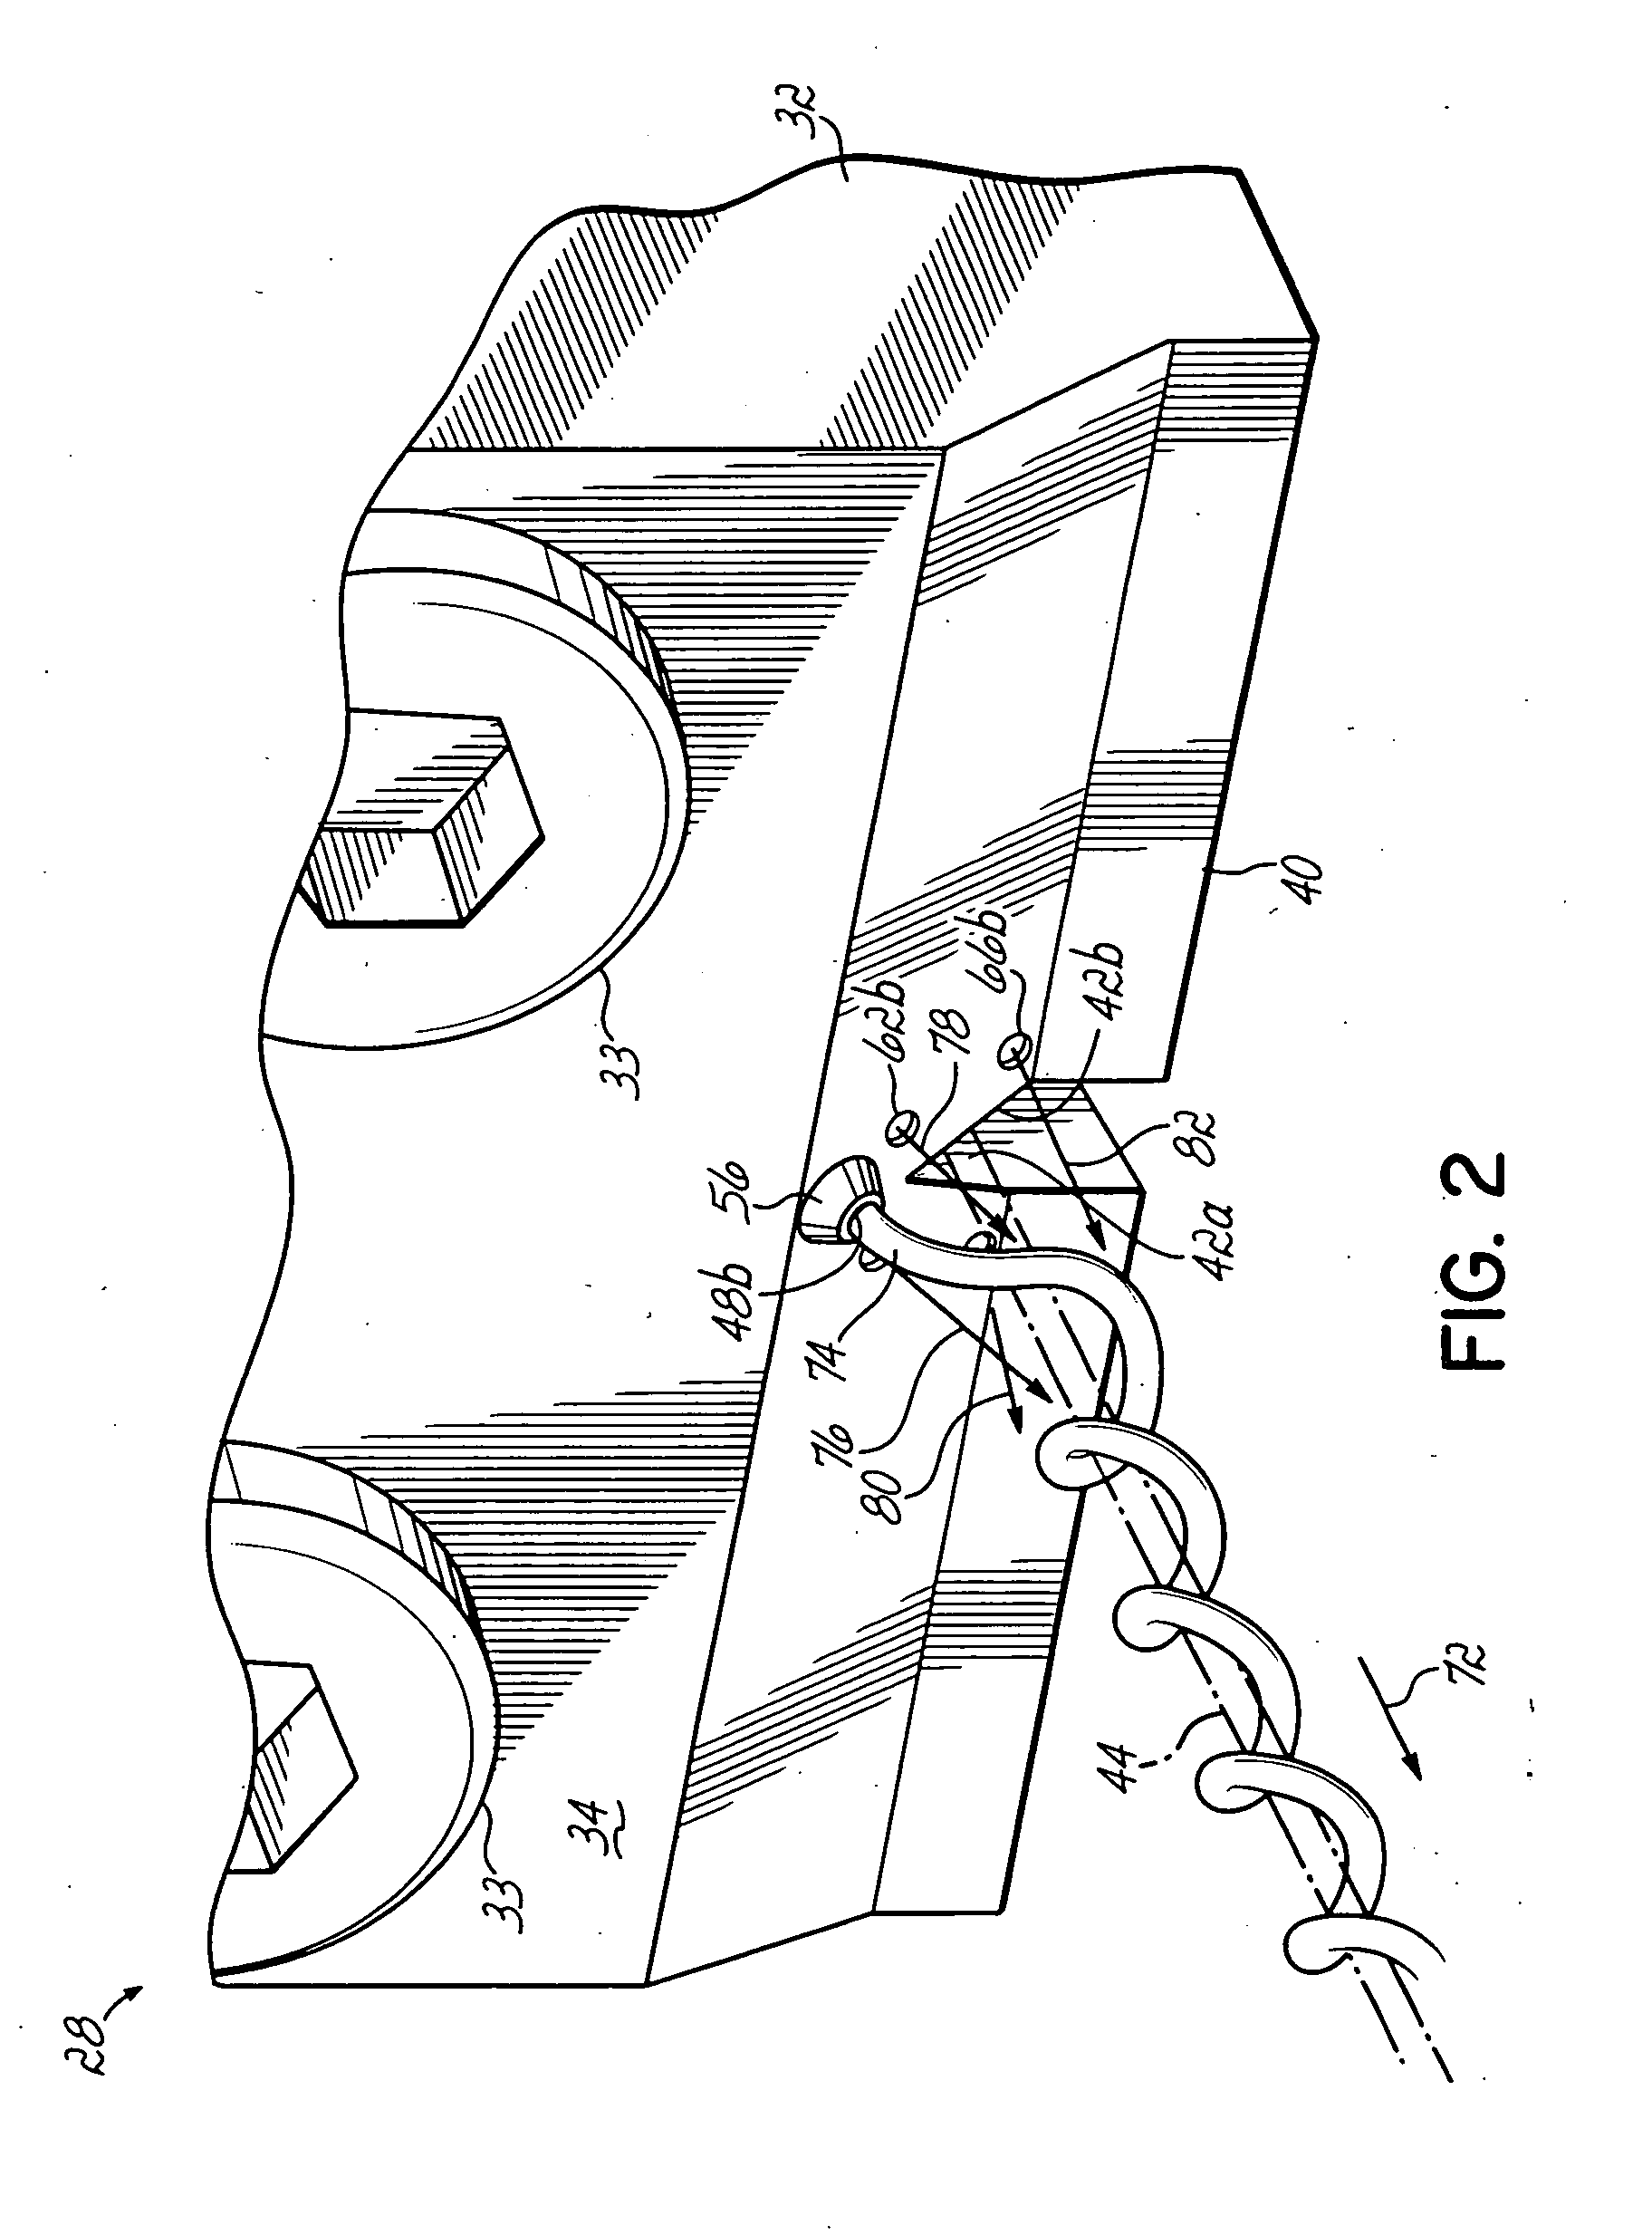 Module, nozzle and method for dispensing controlled patterns of liquid material